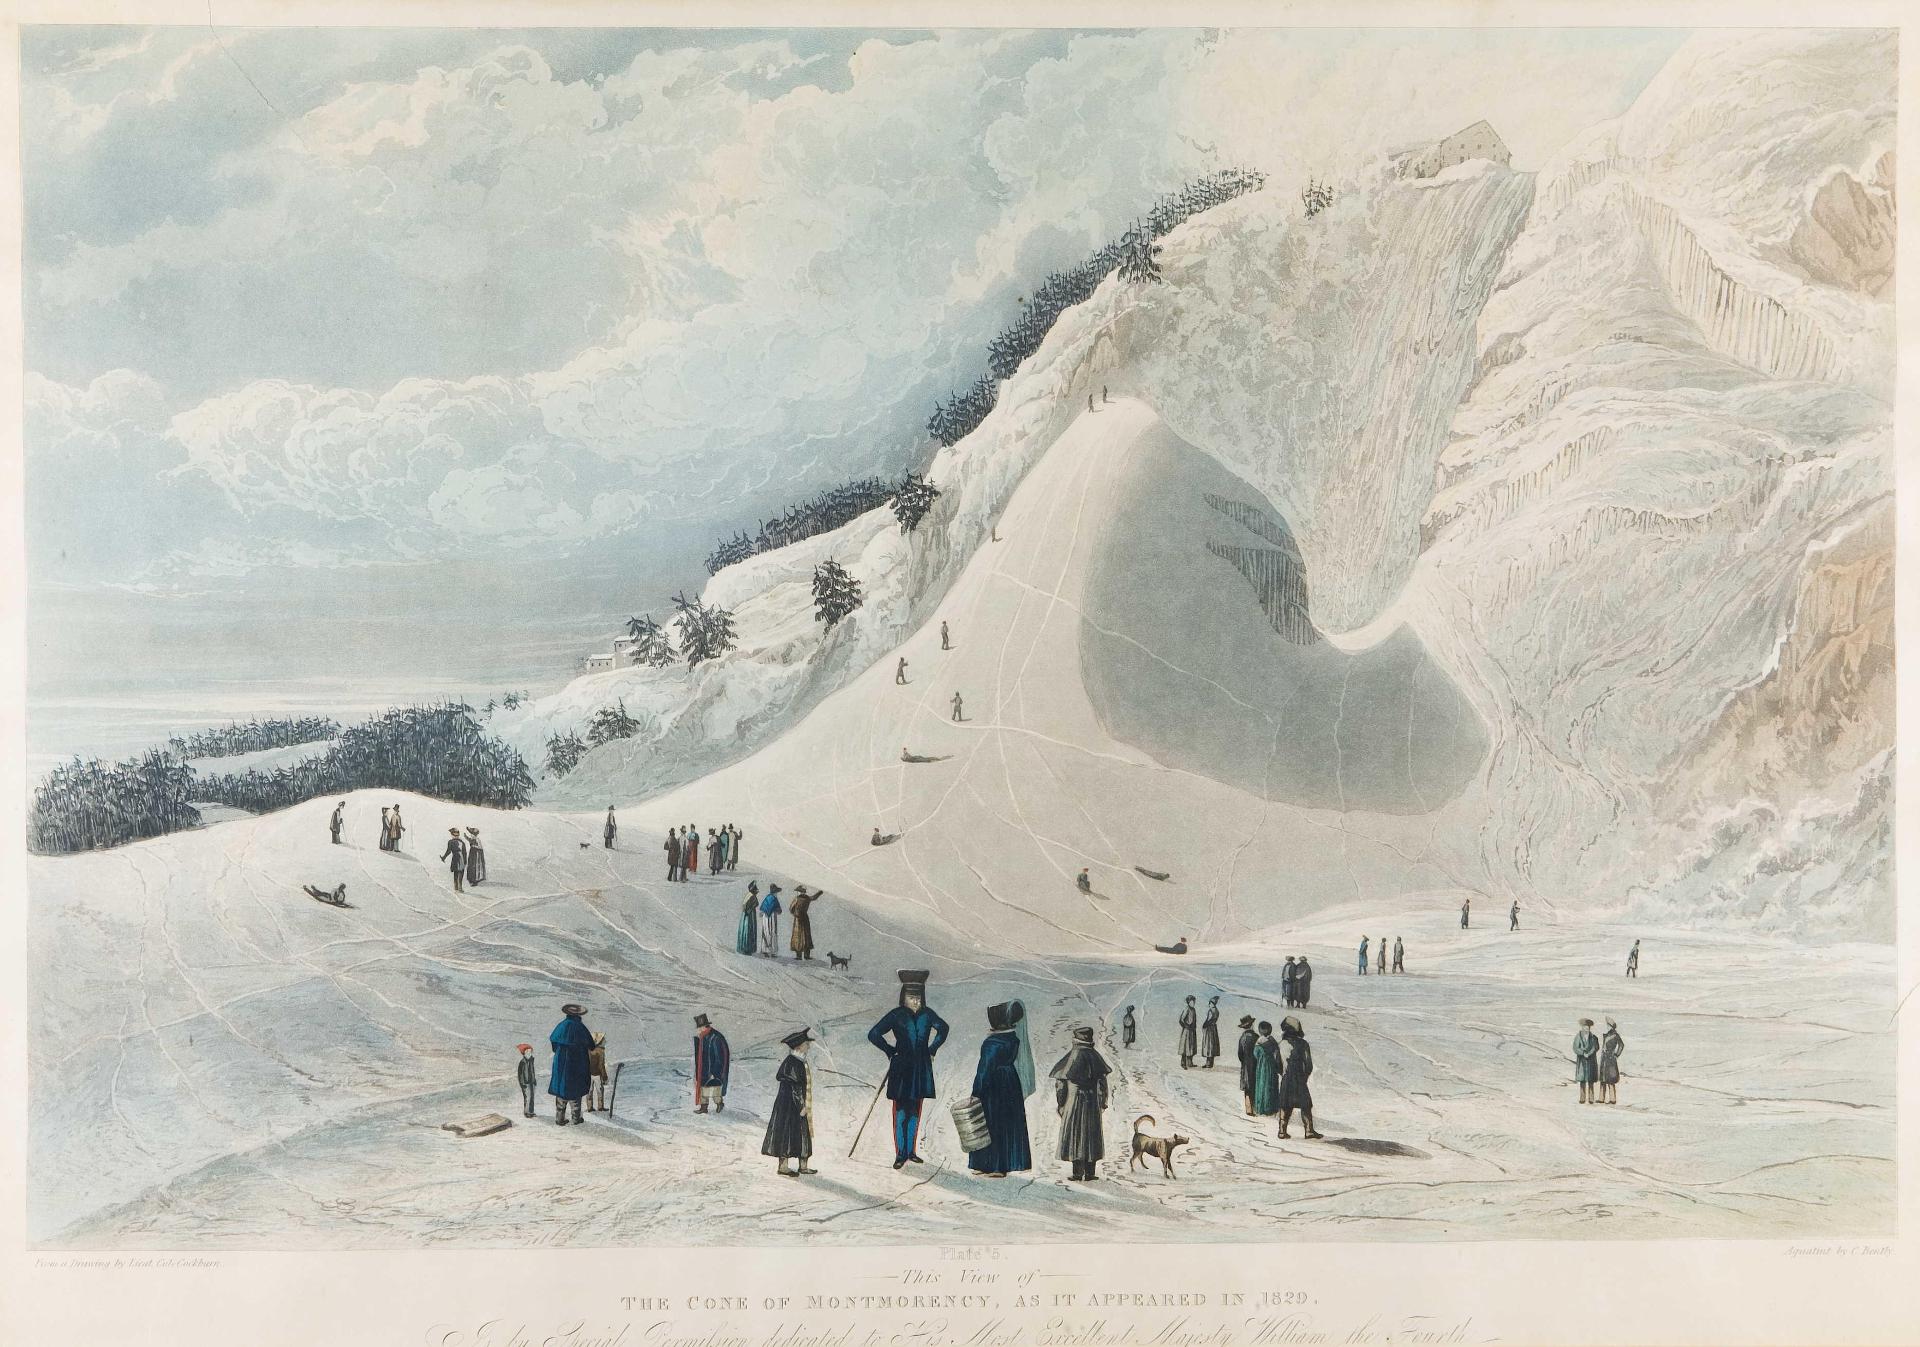 James Pattison Cockburn (1778-1847) - The Cone of Montmorency As It Appeared in 1829 Plate 5, by C.Bentley, published by Ackermann & Co., London 1833